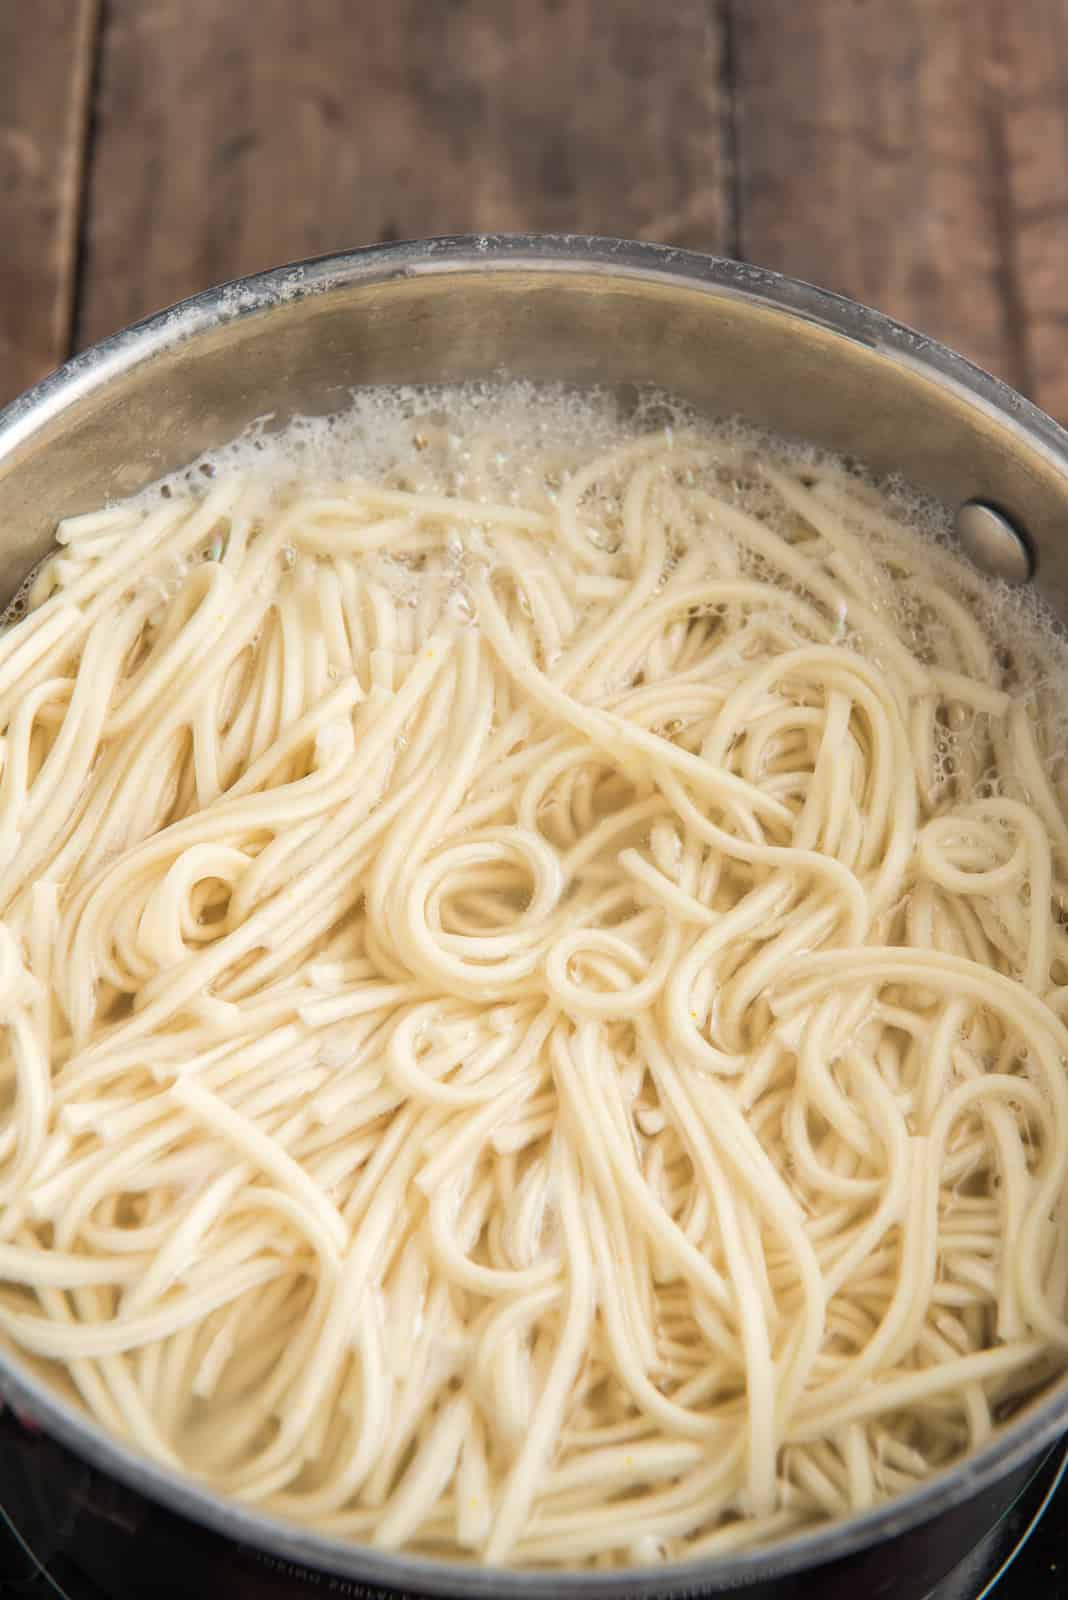 Noodles being cooked in pot.